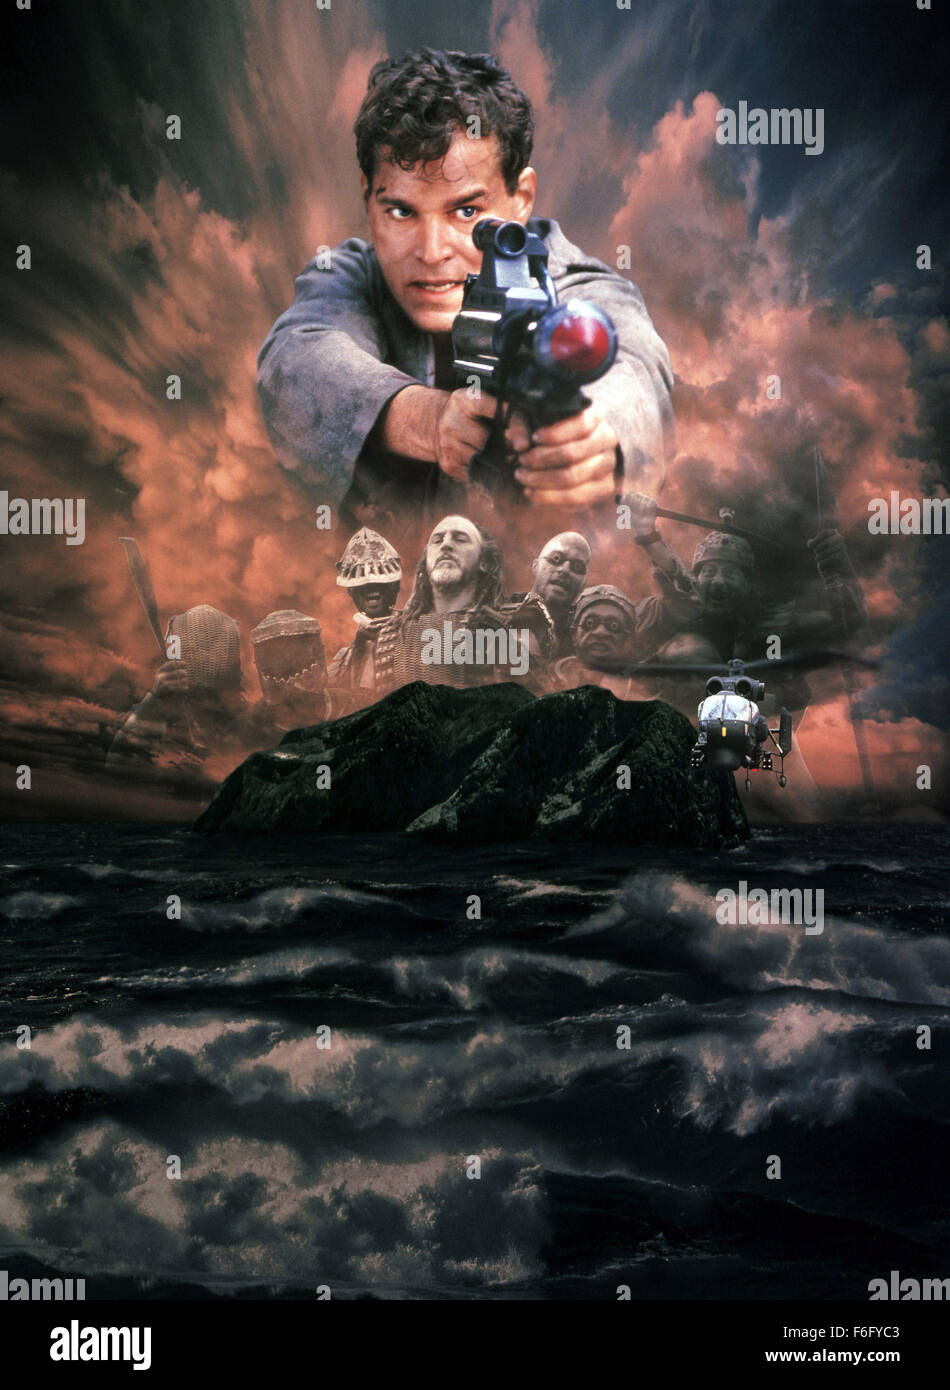 Apr 29, 1994; Queensland, Australia; Key poster art featuring RAY LIOTTA as Capt. J. T. Robbins in the sci-fi action film ''No Escape'' directed by Martin Campbell. Stock Photo